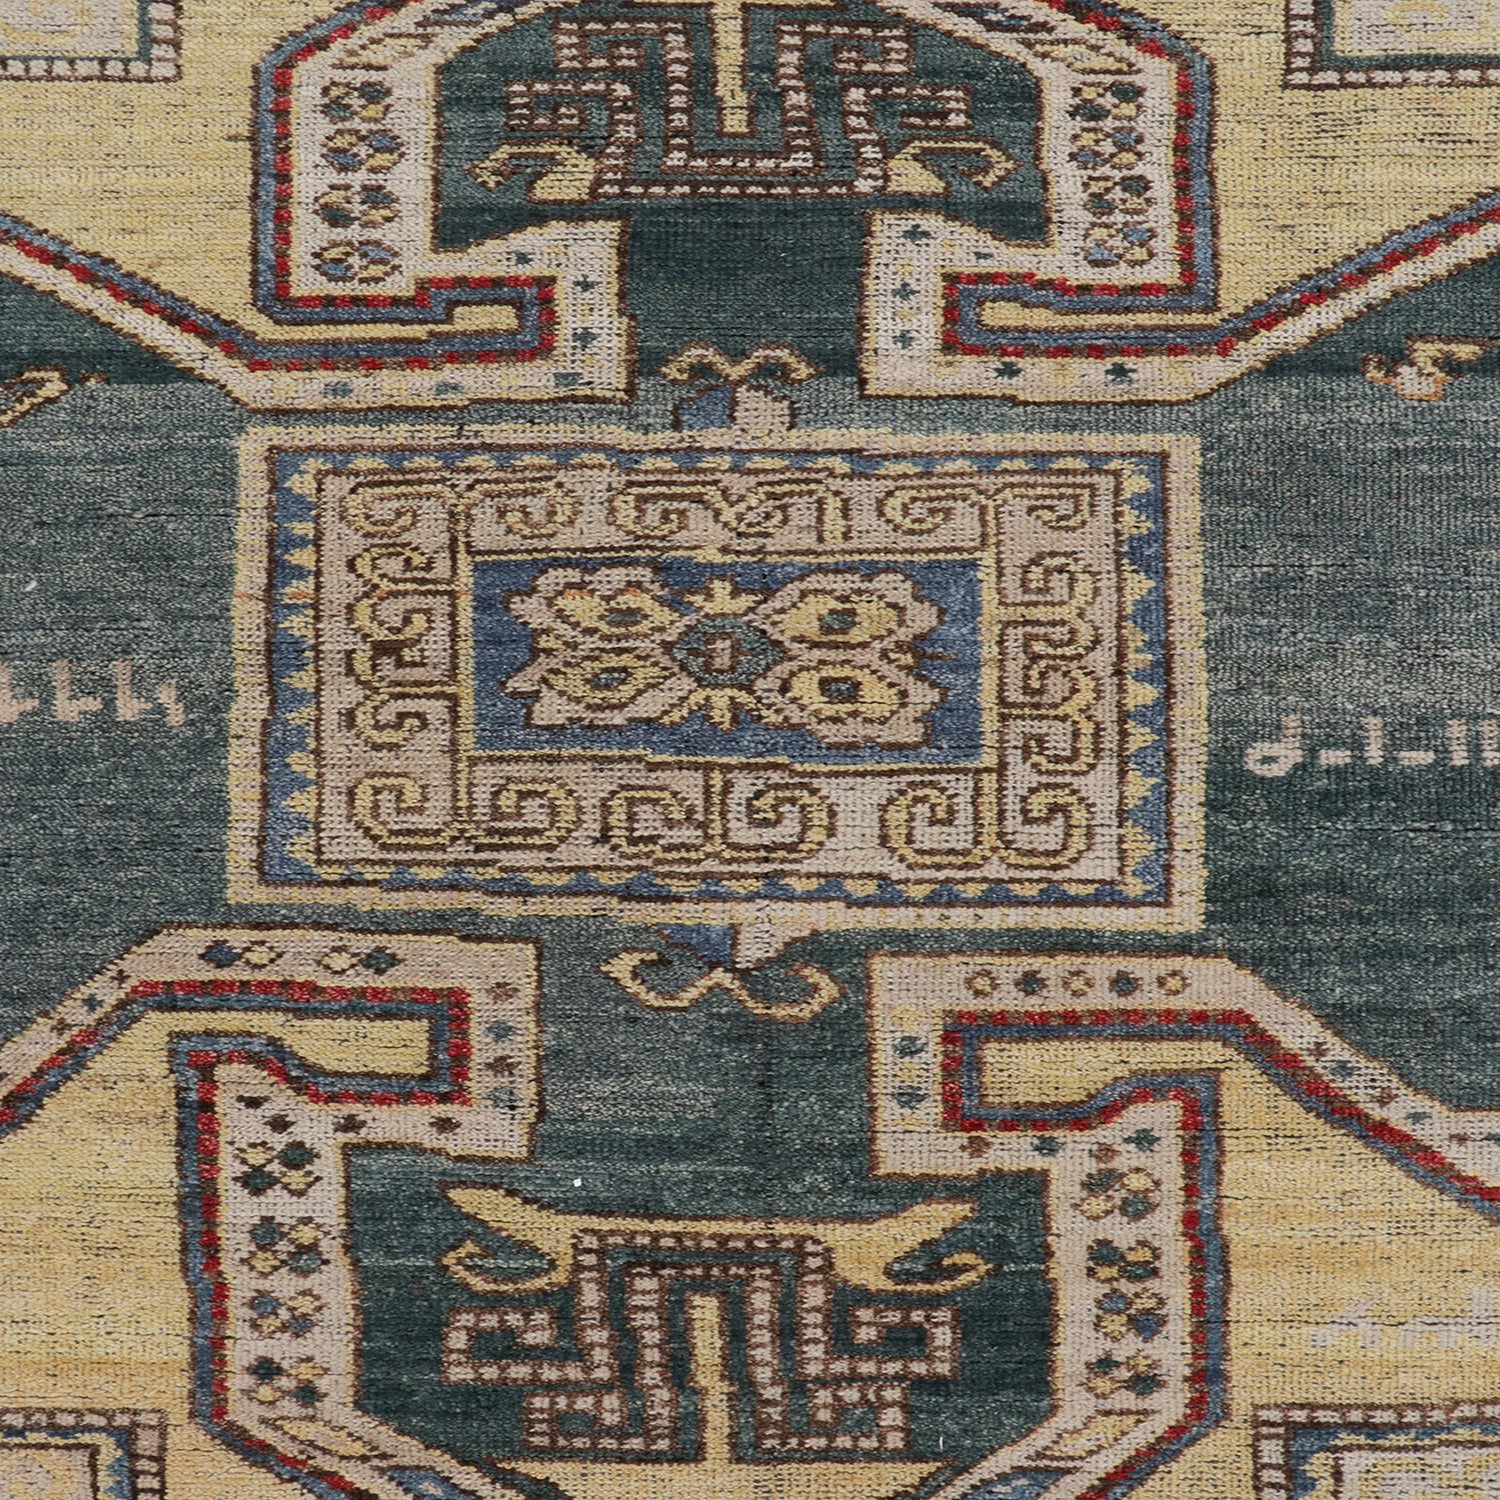 Close-up of a traditional Middle Eastern or Central Asian rug.